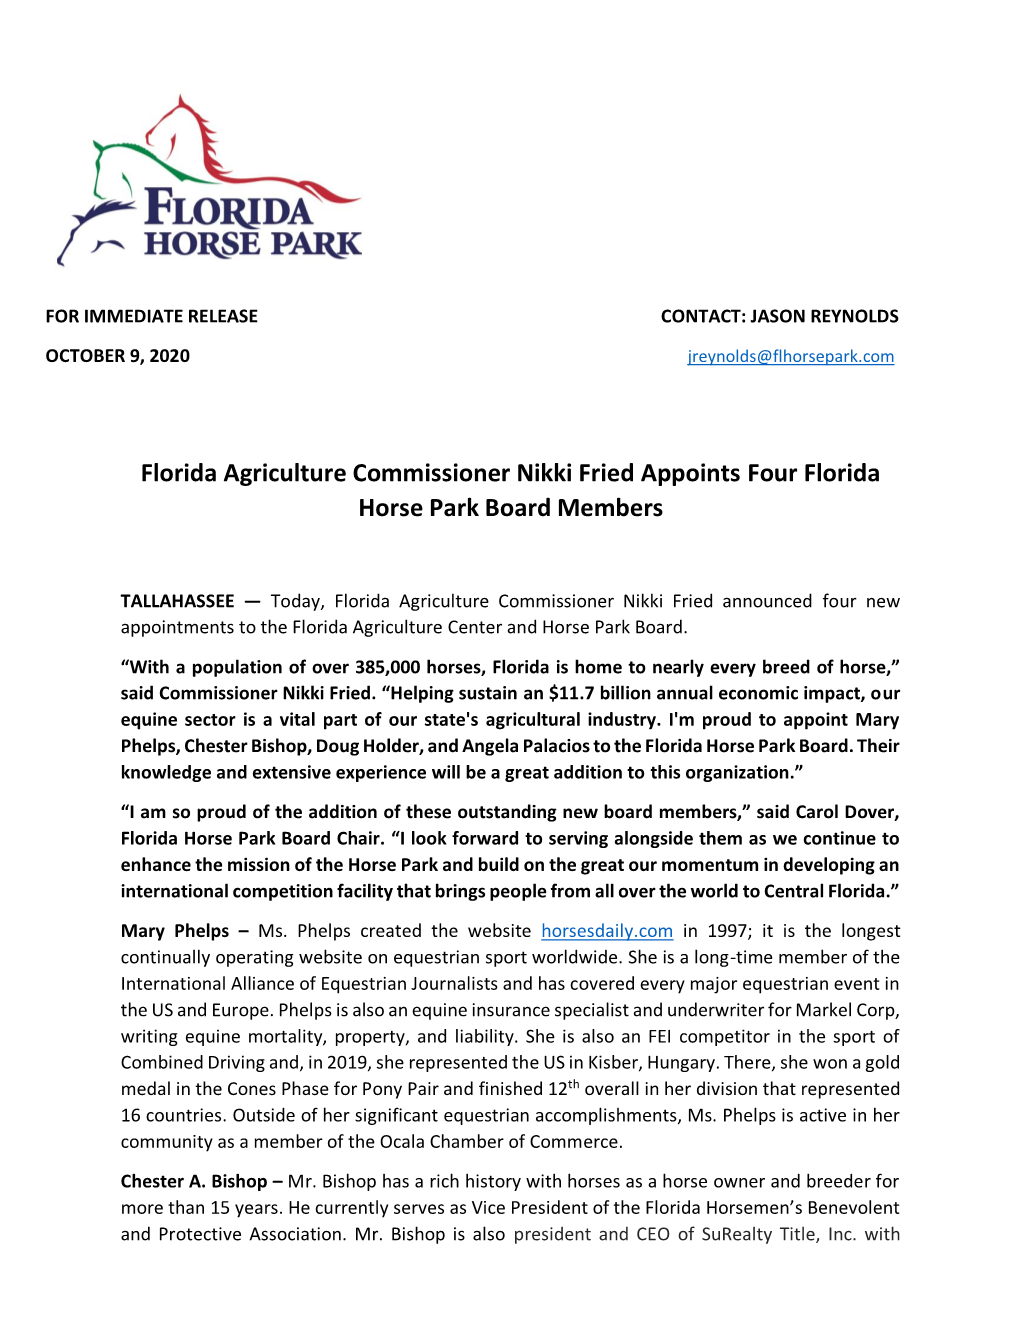 Florida Agriculture Commissioner Nikki Fried Appoints Four Florida Horse Park Board Members